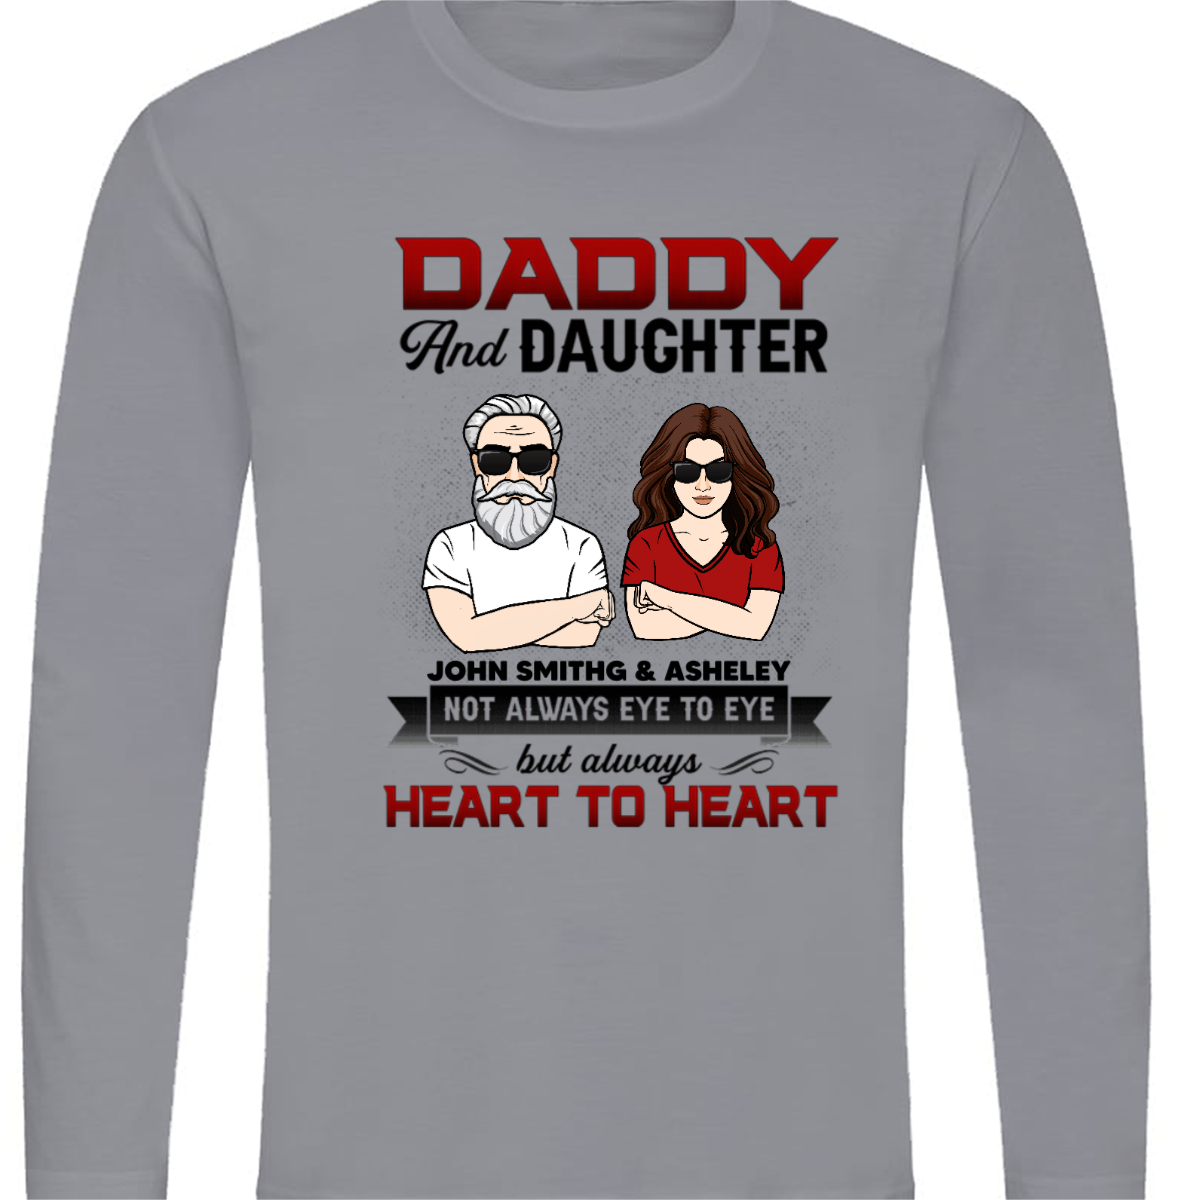 Daddy & Daughter Heart To Heart Personalized Long Sleeve Shirt